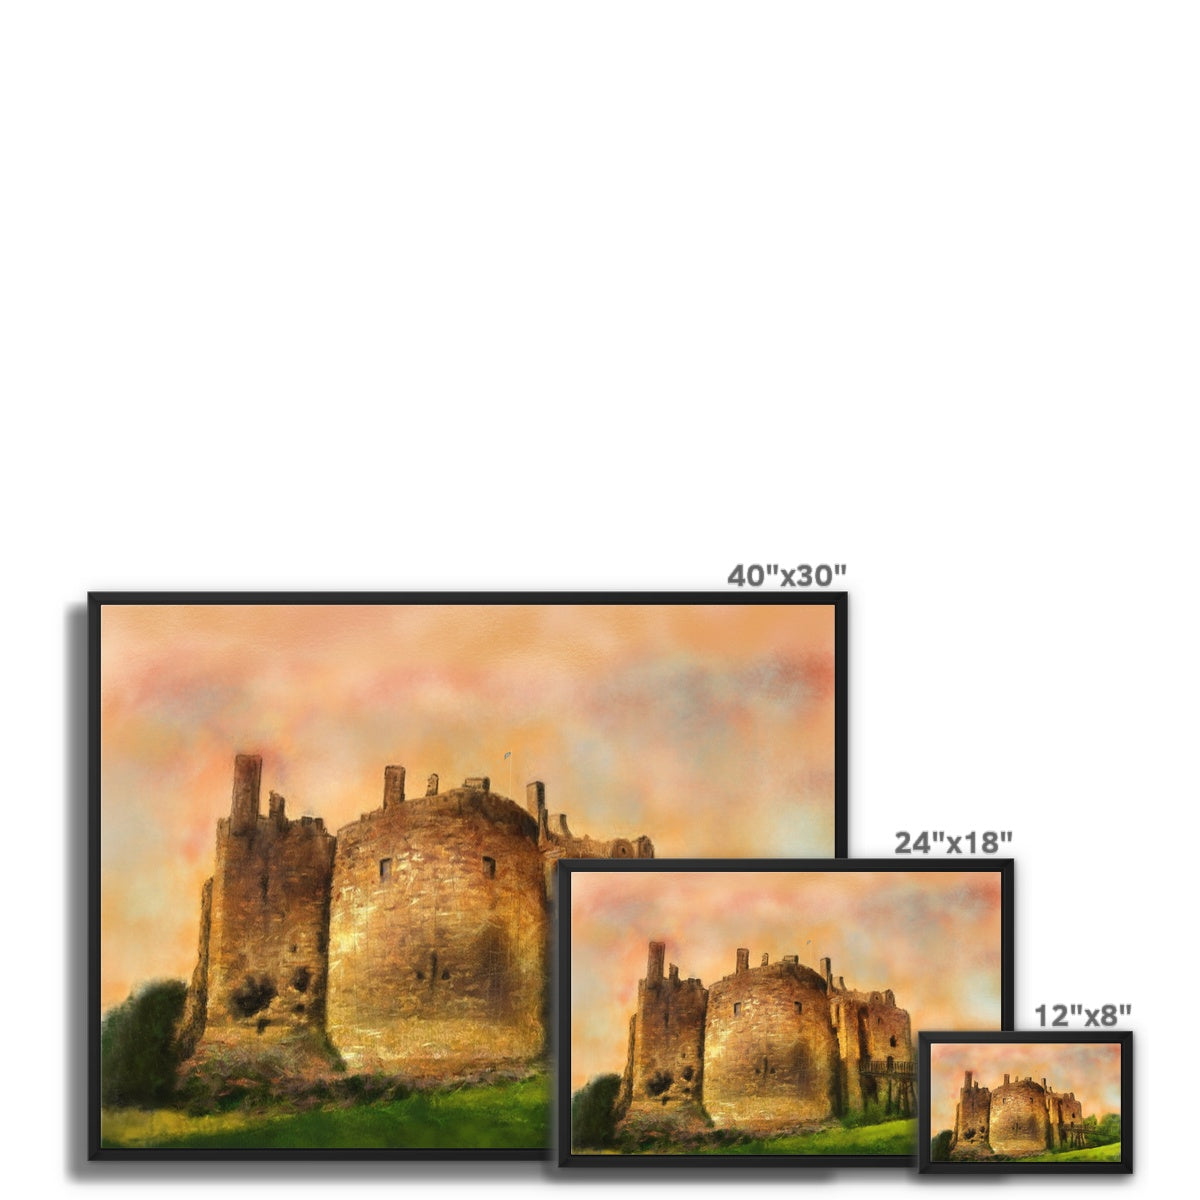 Dirleton Castle Dusk Painting | Framed Canvas From Scotland-Floating Framed Canvas Prints-Historic & Iconic Scotland Art Gallery-Paintings, Prints, Homeware, Art Gifts From Scotland By Scottish Artist Kevin Hunter